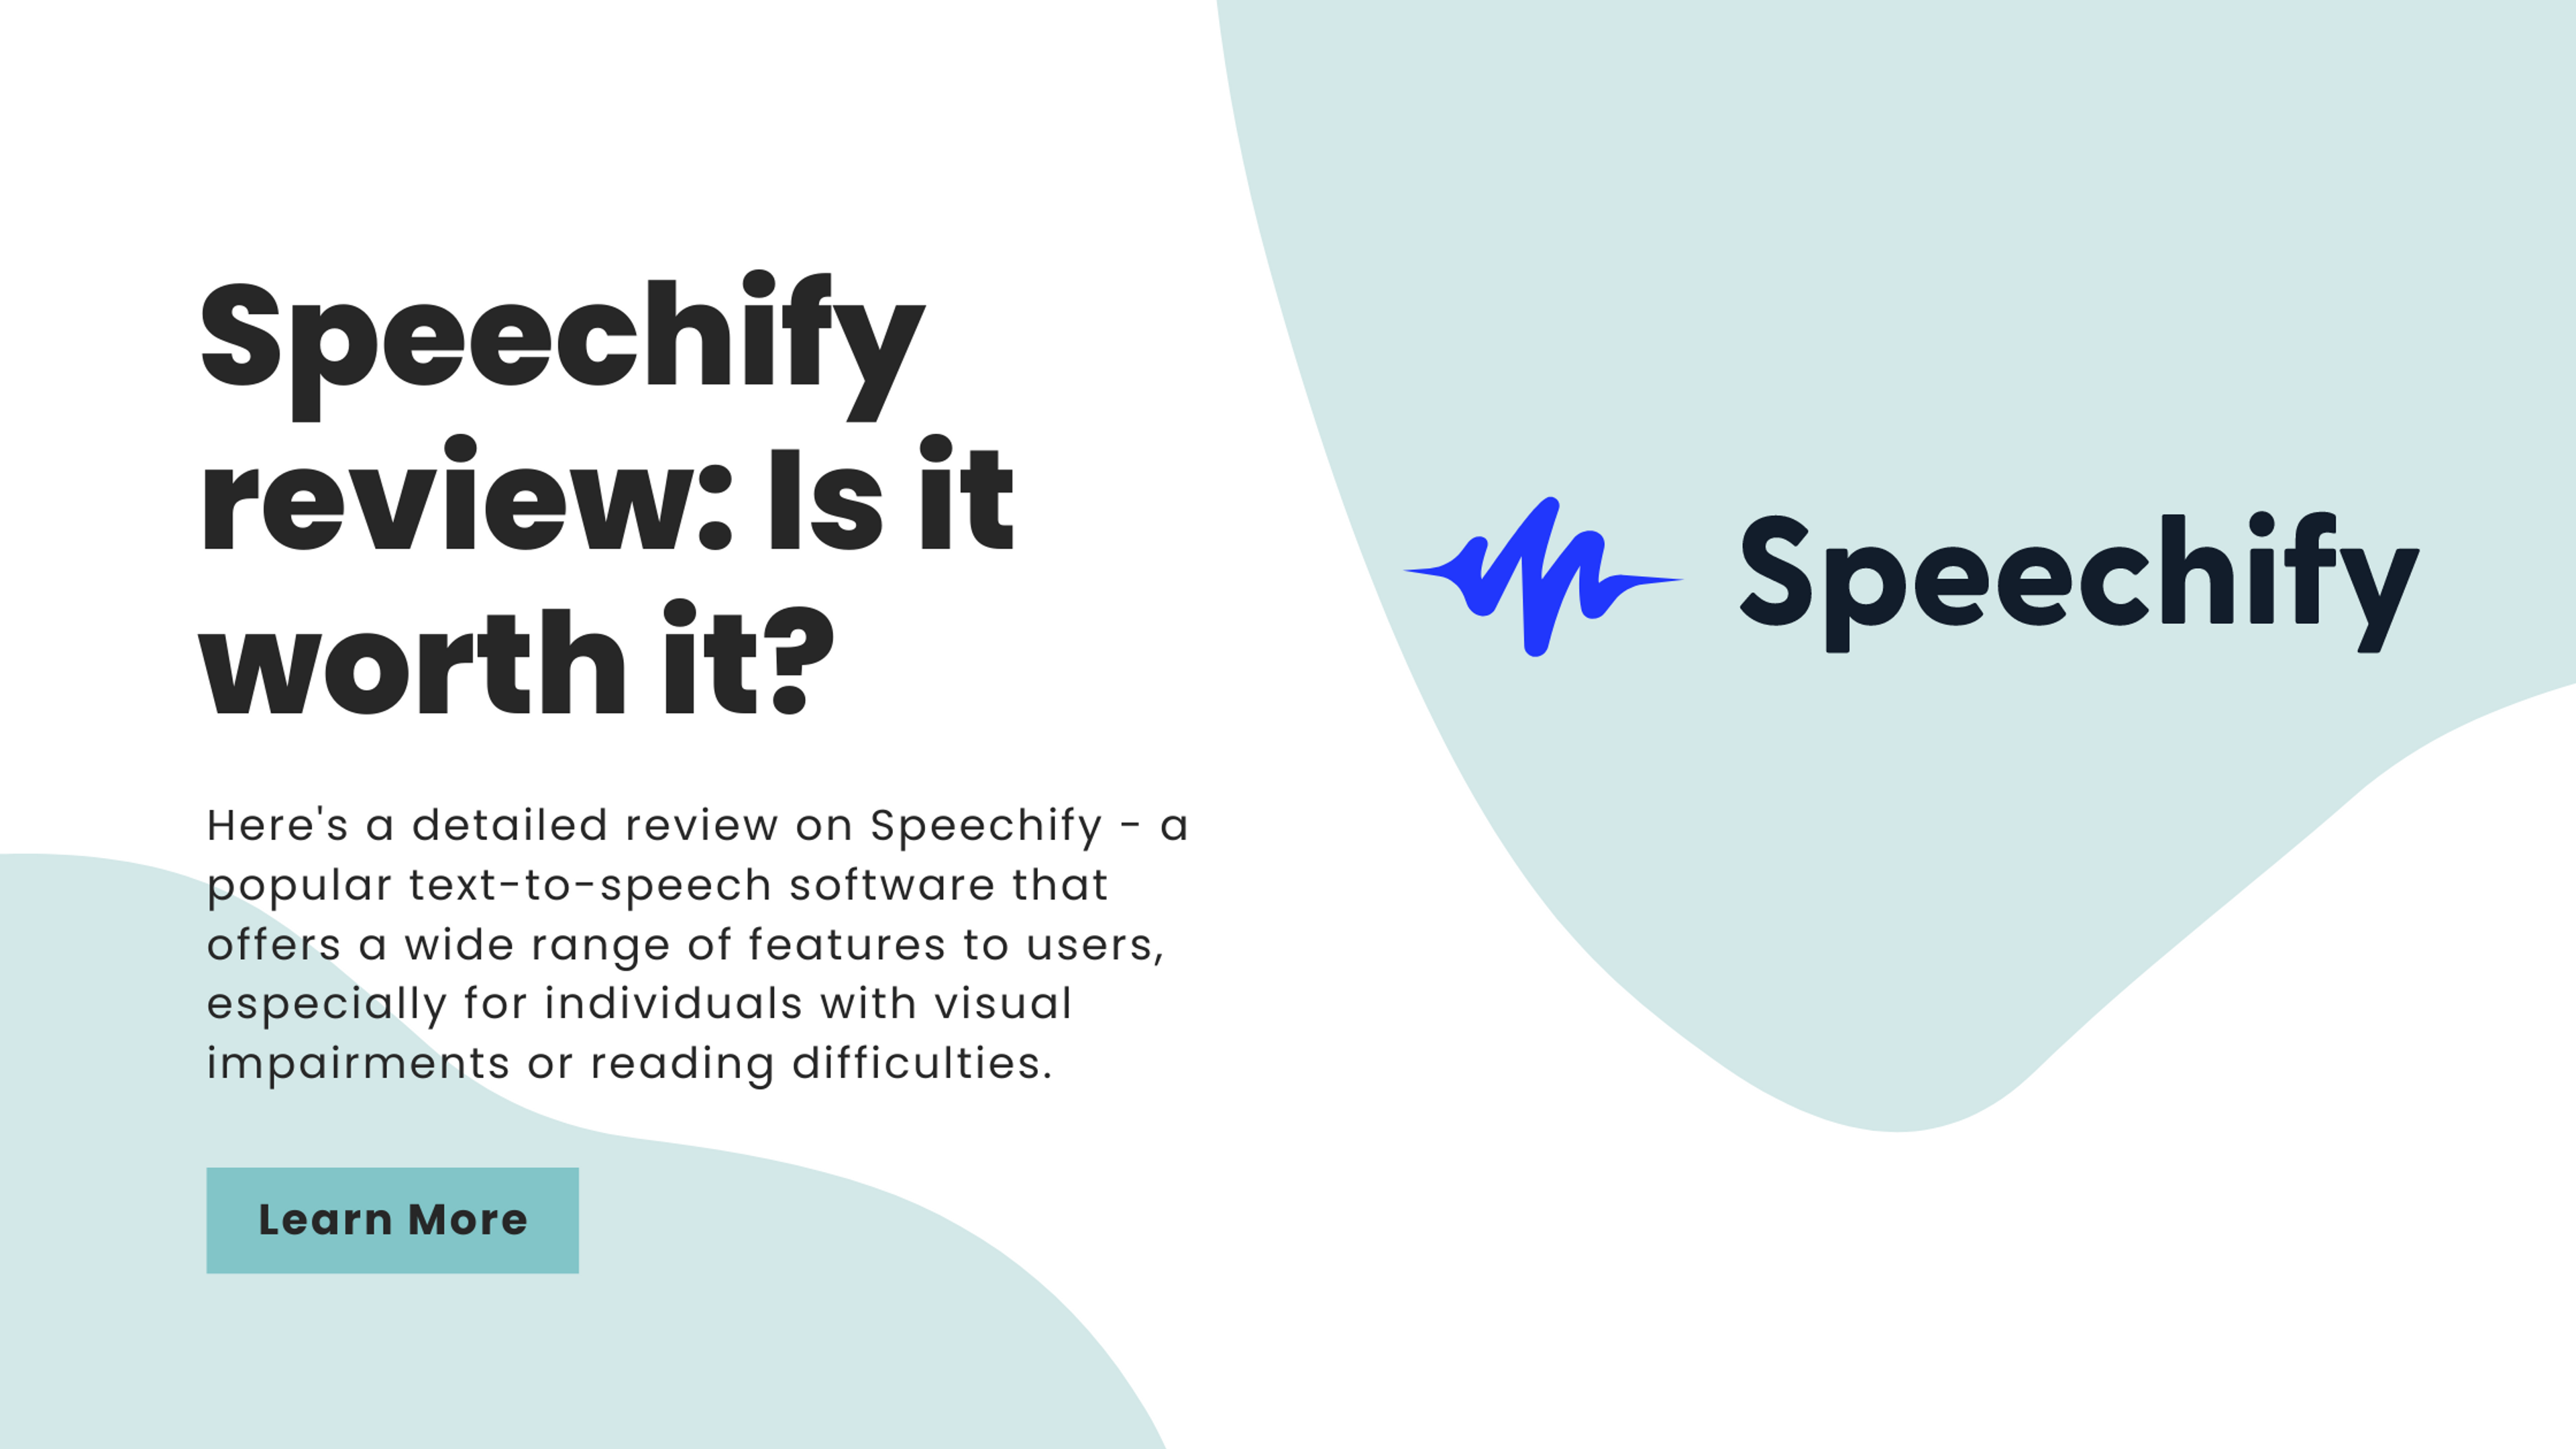 Speechify review: Is it worth it?